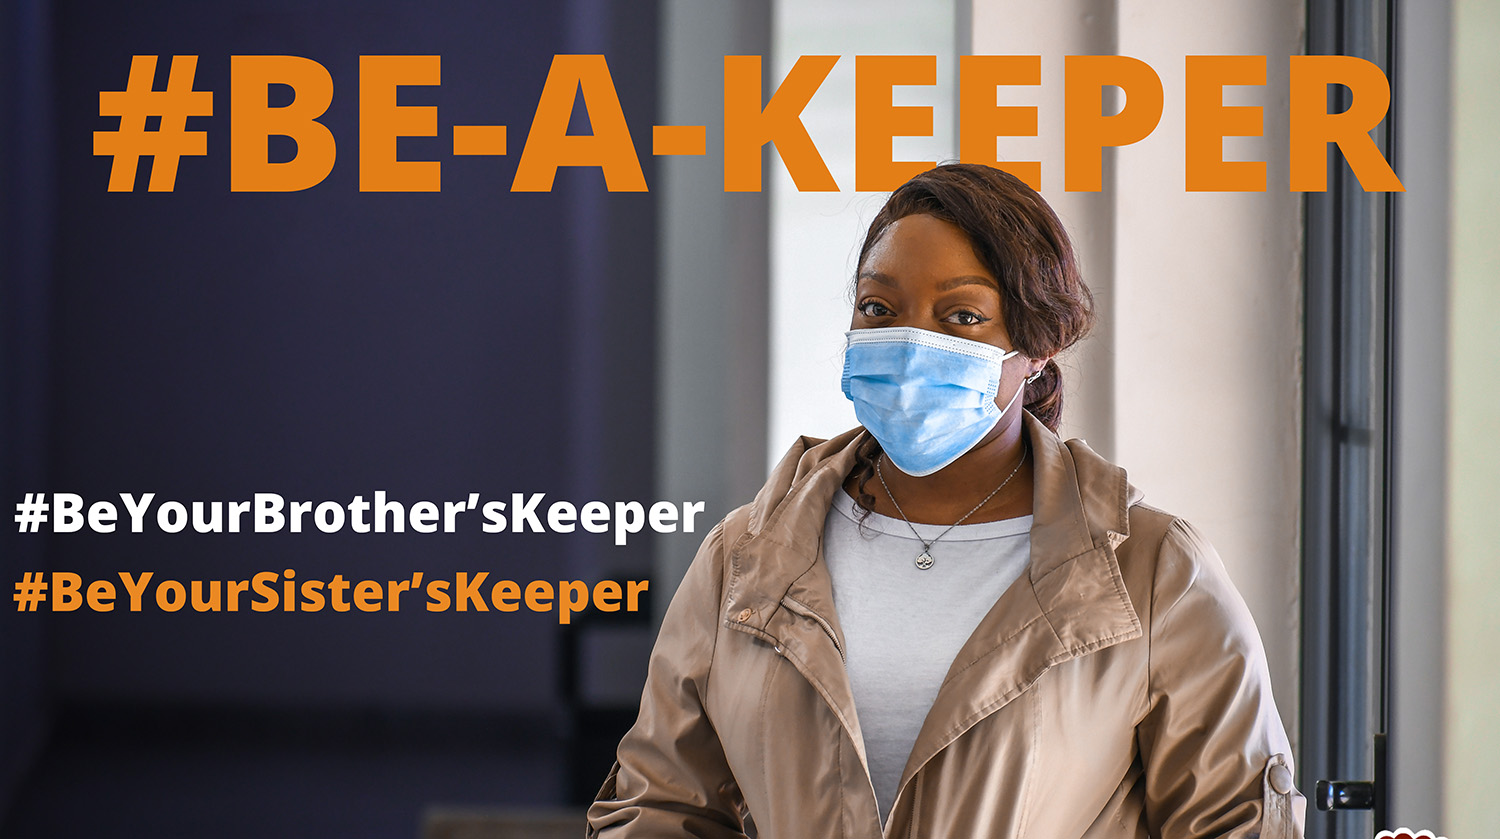 Be-A-Keeper_3